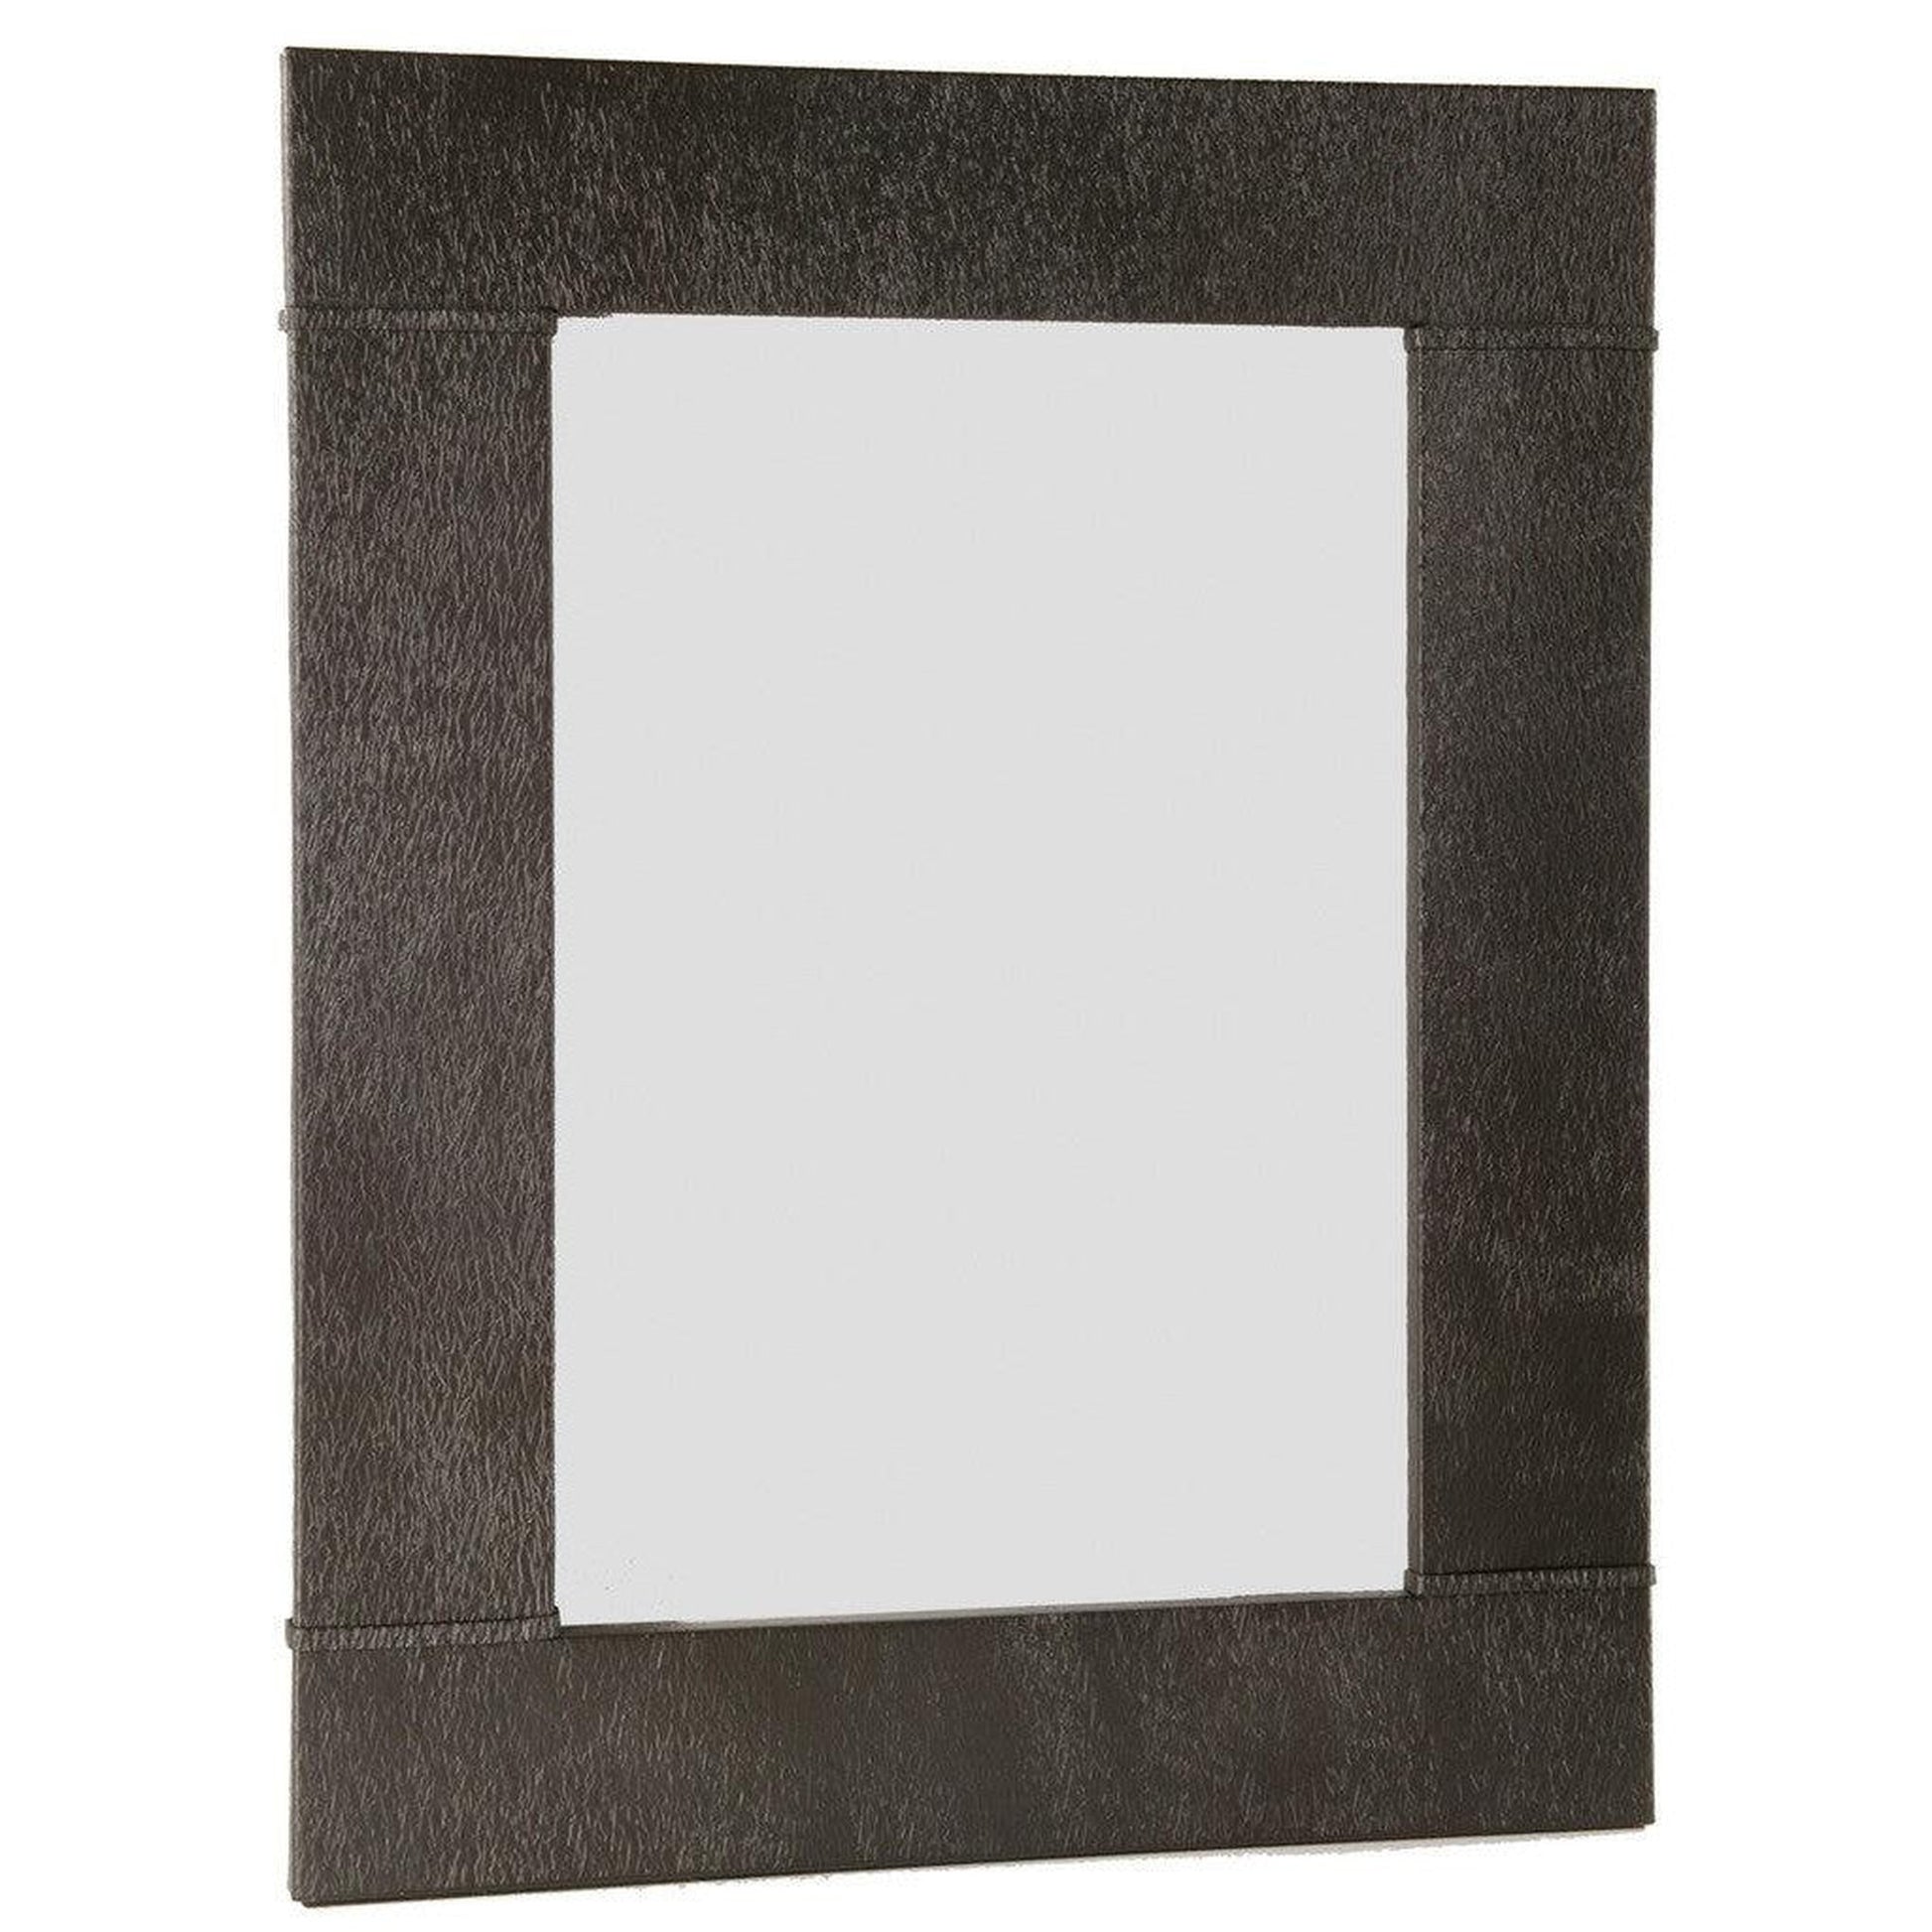 Stone County Ironworks Cedarvale 37" x 45" Large Satin Black Iron Wall Mirror With Gold Iron Accent